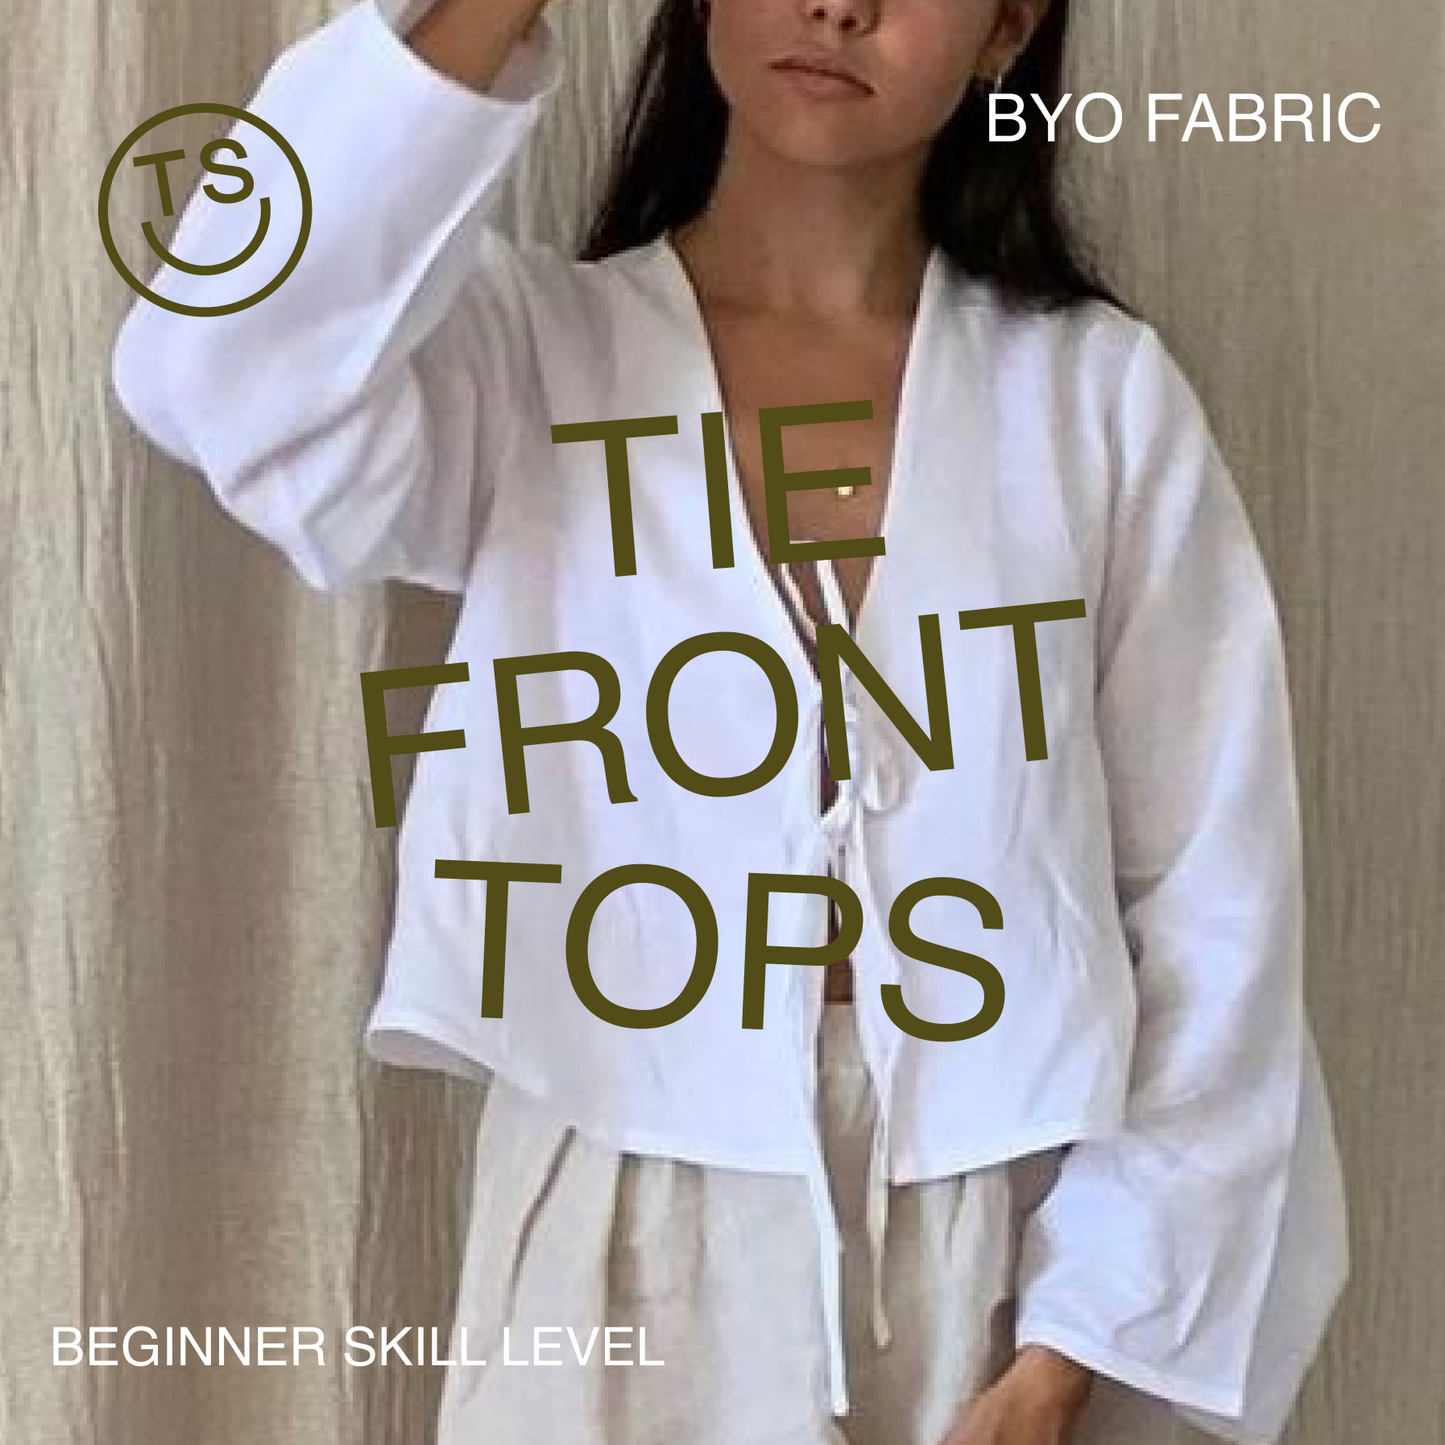 Beginner - Tie Front Tops (BYO Fabric!) Saturday Sept 30th